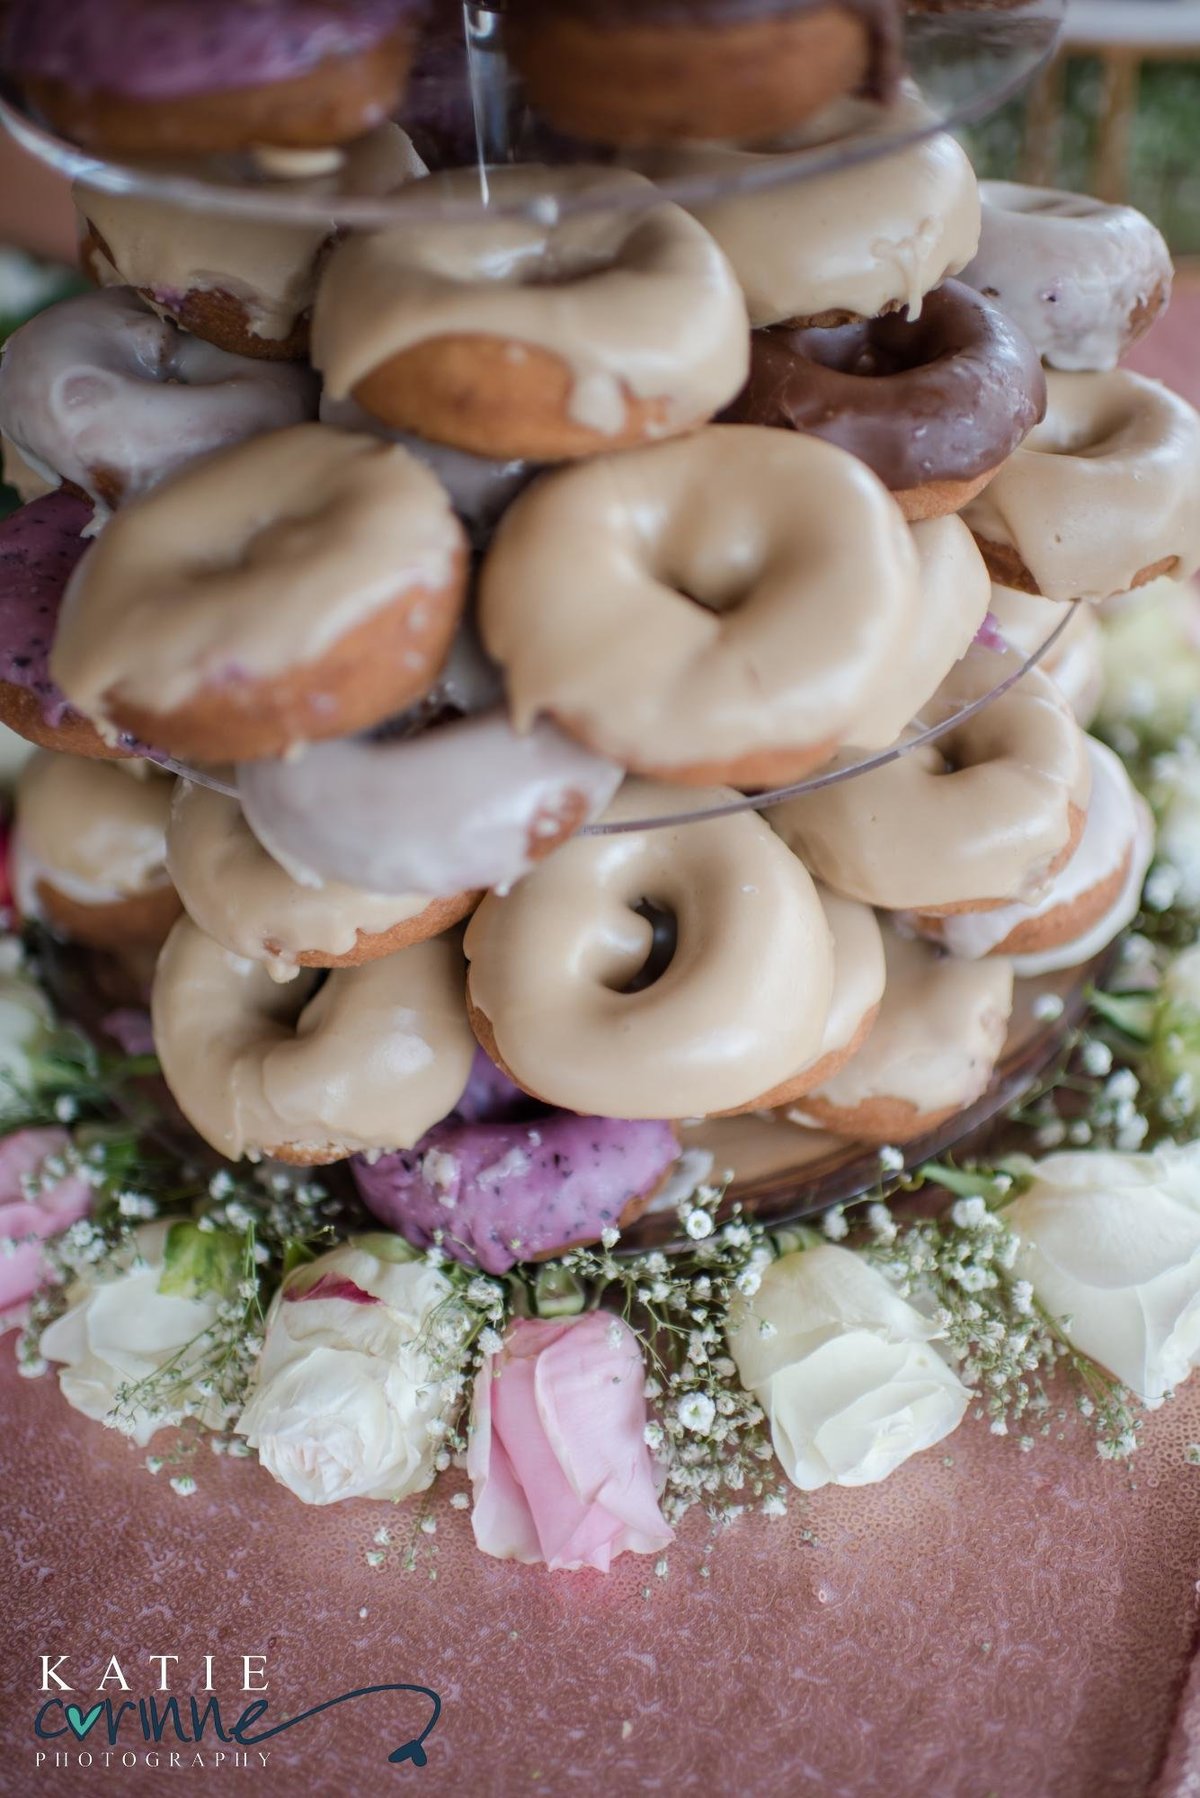 donuts instead of wedding cake